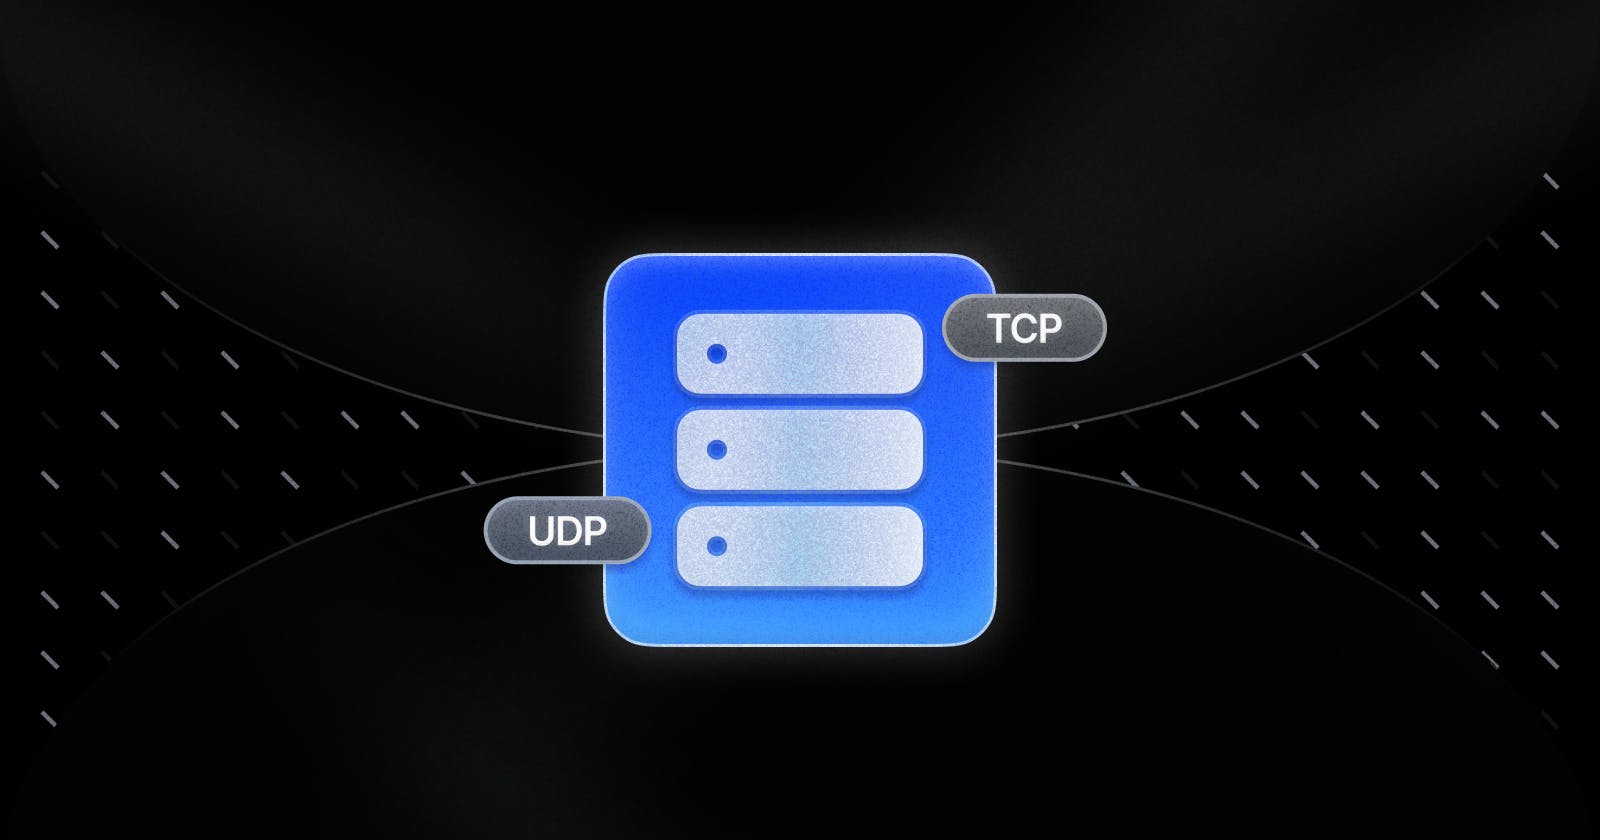 Understanding Congestion Control: TCP, UDP, and Video Conferencing